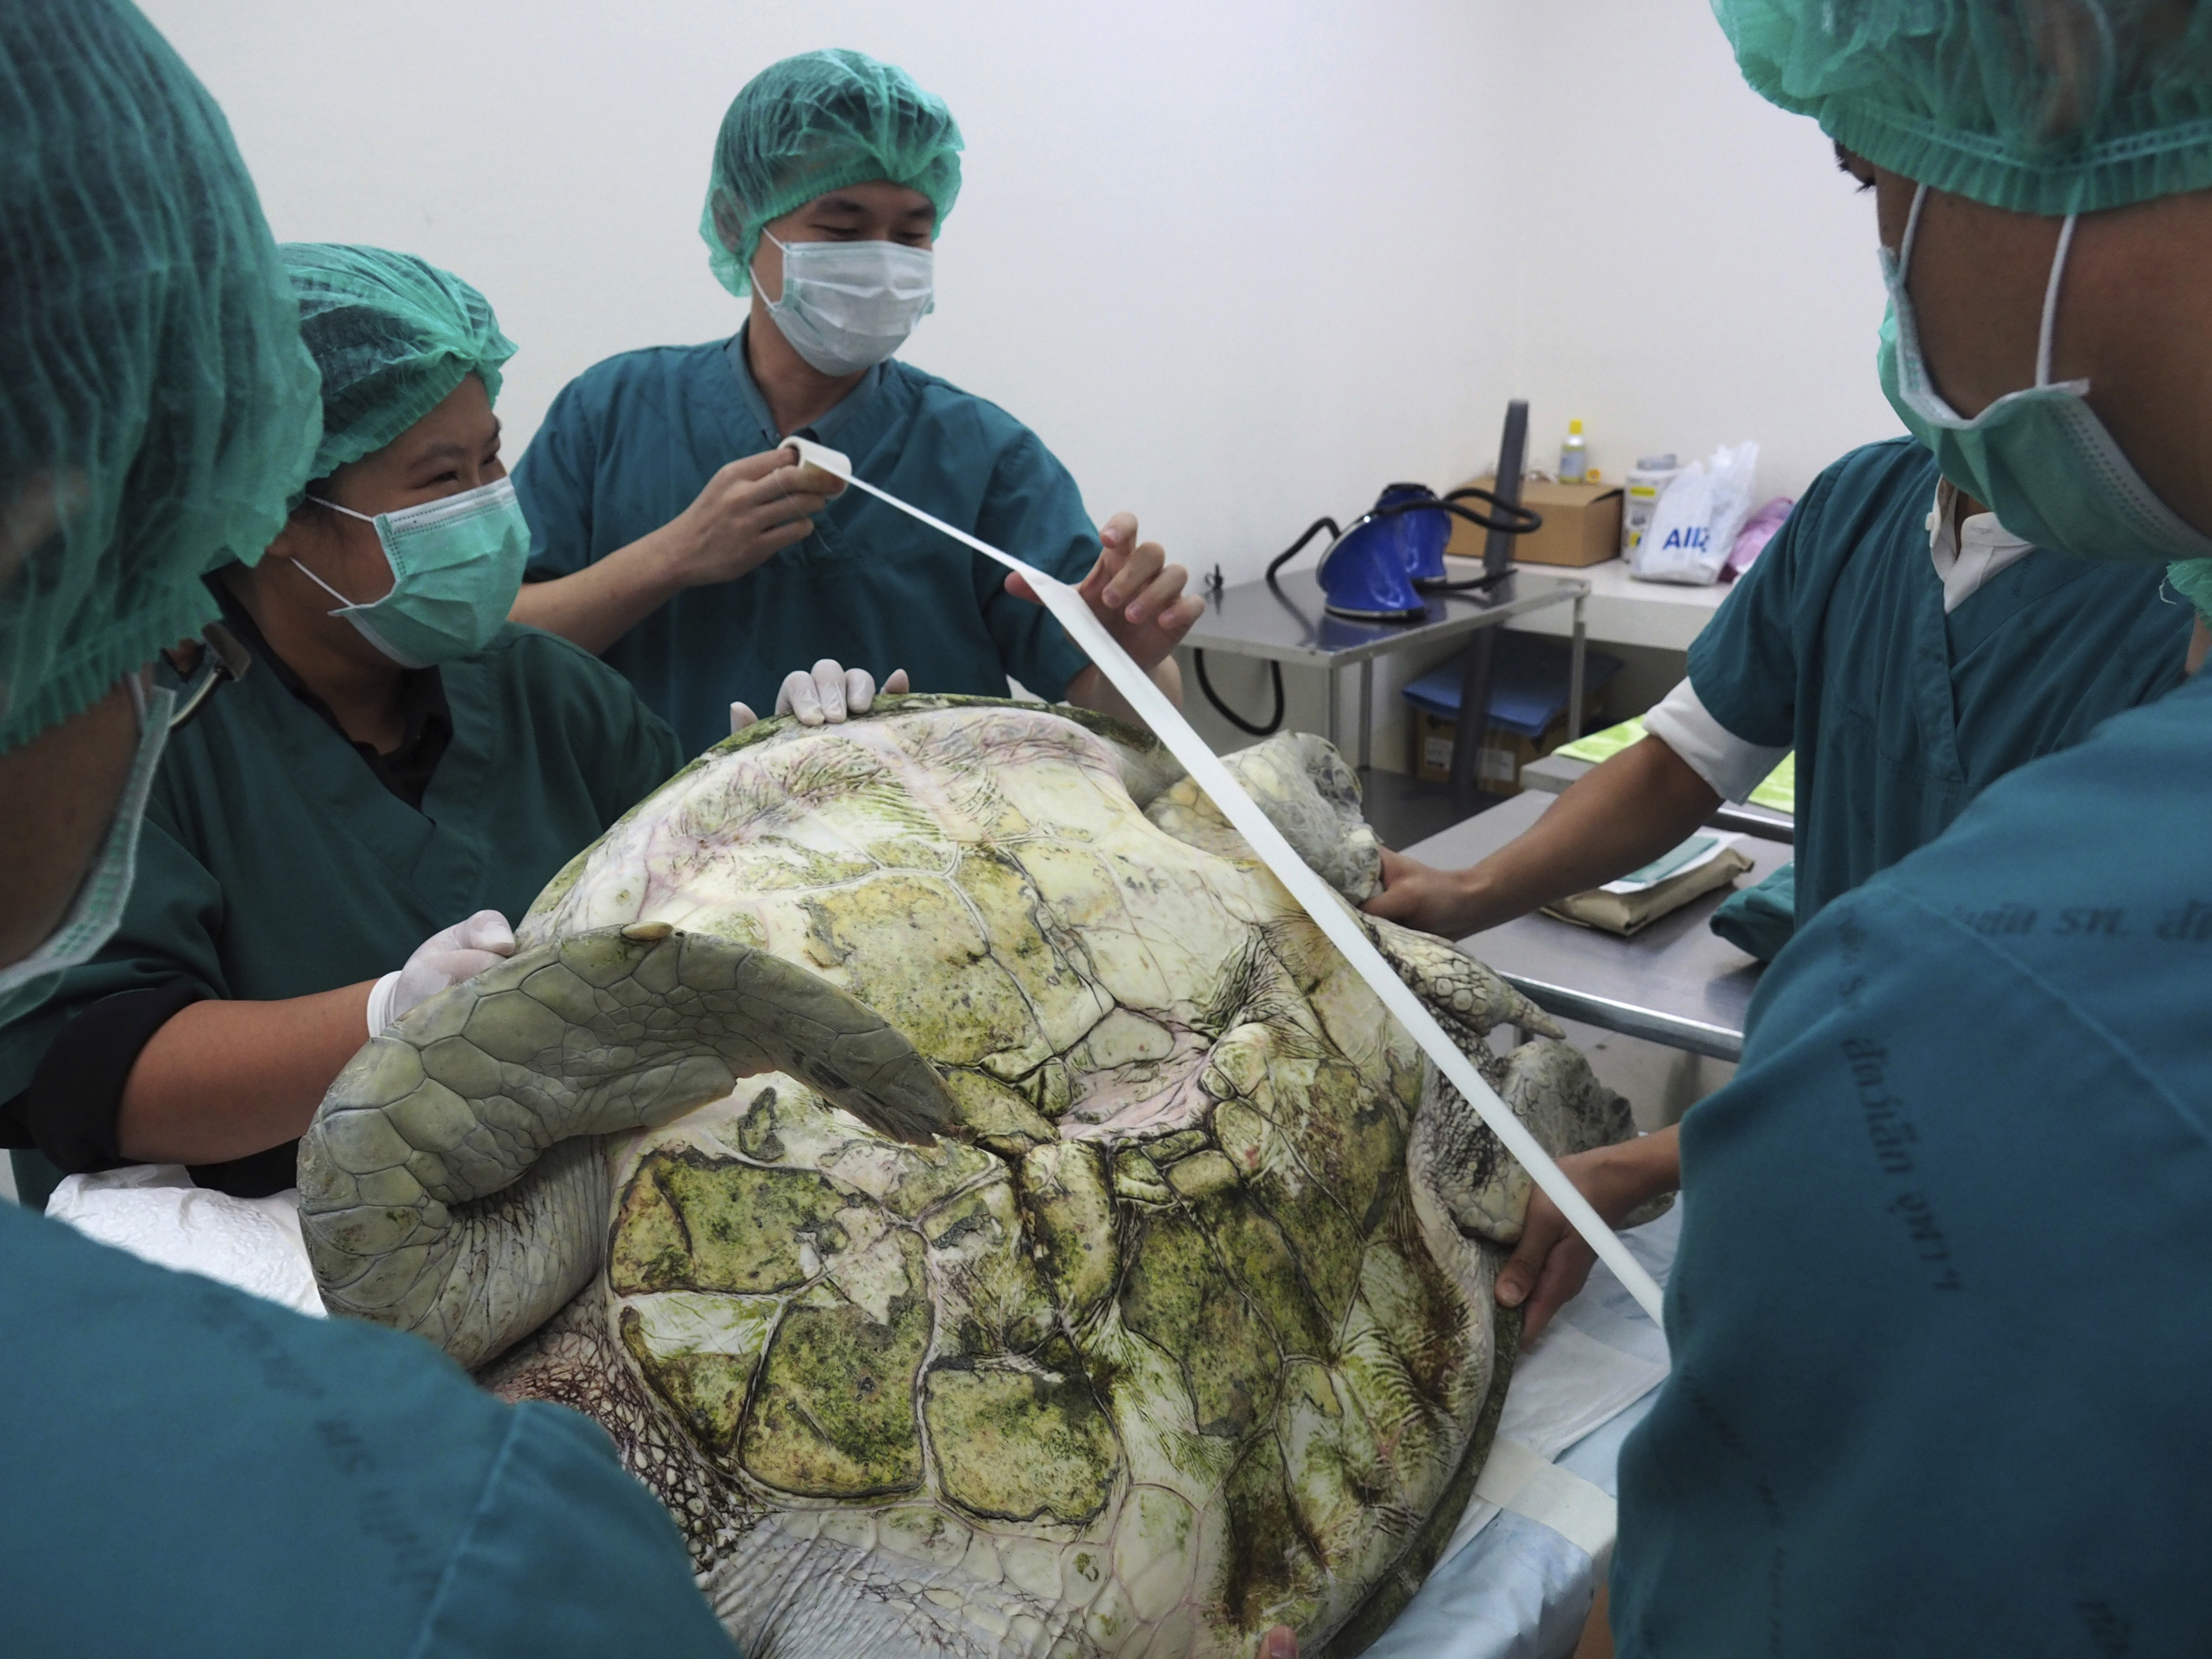 In this photo released by Chulalongkorn University's veterinary faculty, veterinarians prepare to operate the female green green turtle nicknamed "Bank" at the veterinary faculty in Bangkok, Thailand, Monday, March 6, 2017. Veterinarians operated on "Bank," removing less than 1,000 coins from the endangered animal. Her indigestible diet was a result of many tourists seeking good fortune tossing coins into her pool over many years in the eastern town of Sri Racha. (Chulalongkorn University's veterinary faculty via AP)